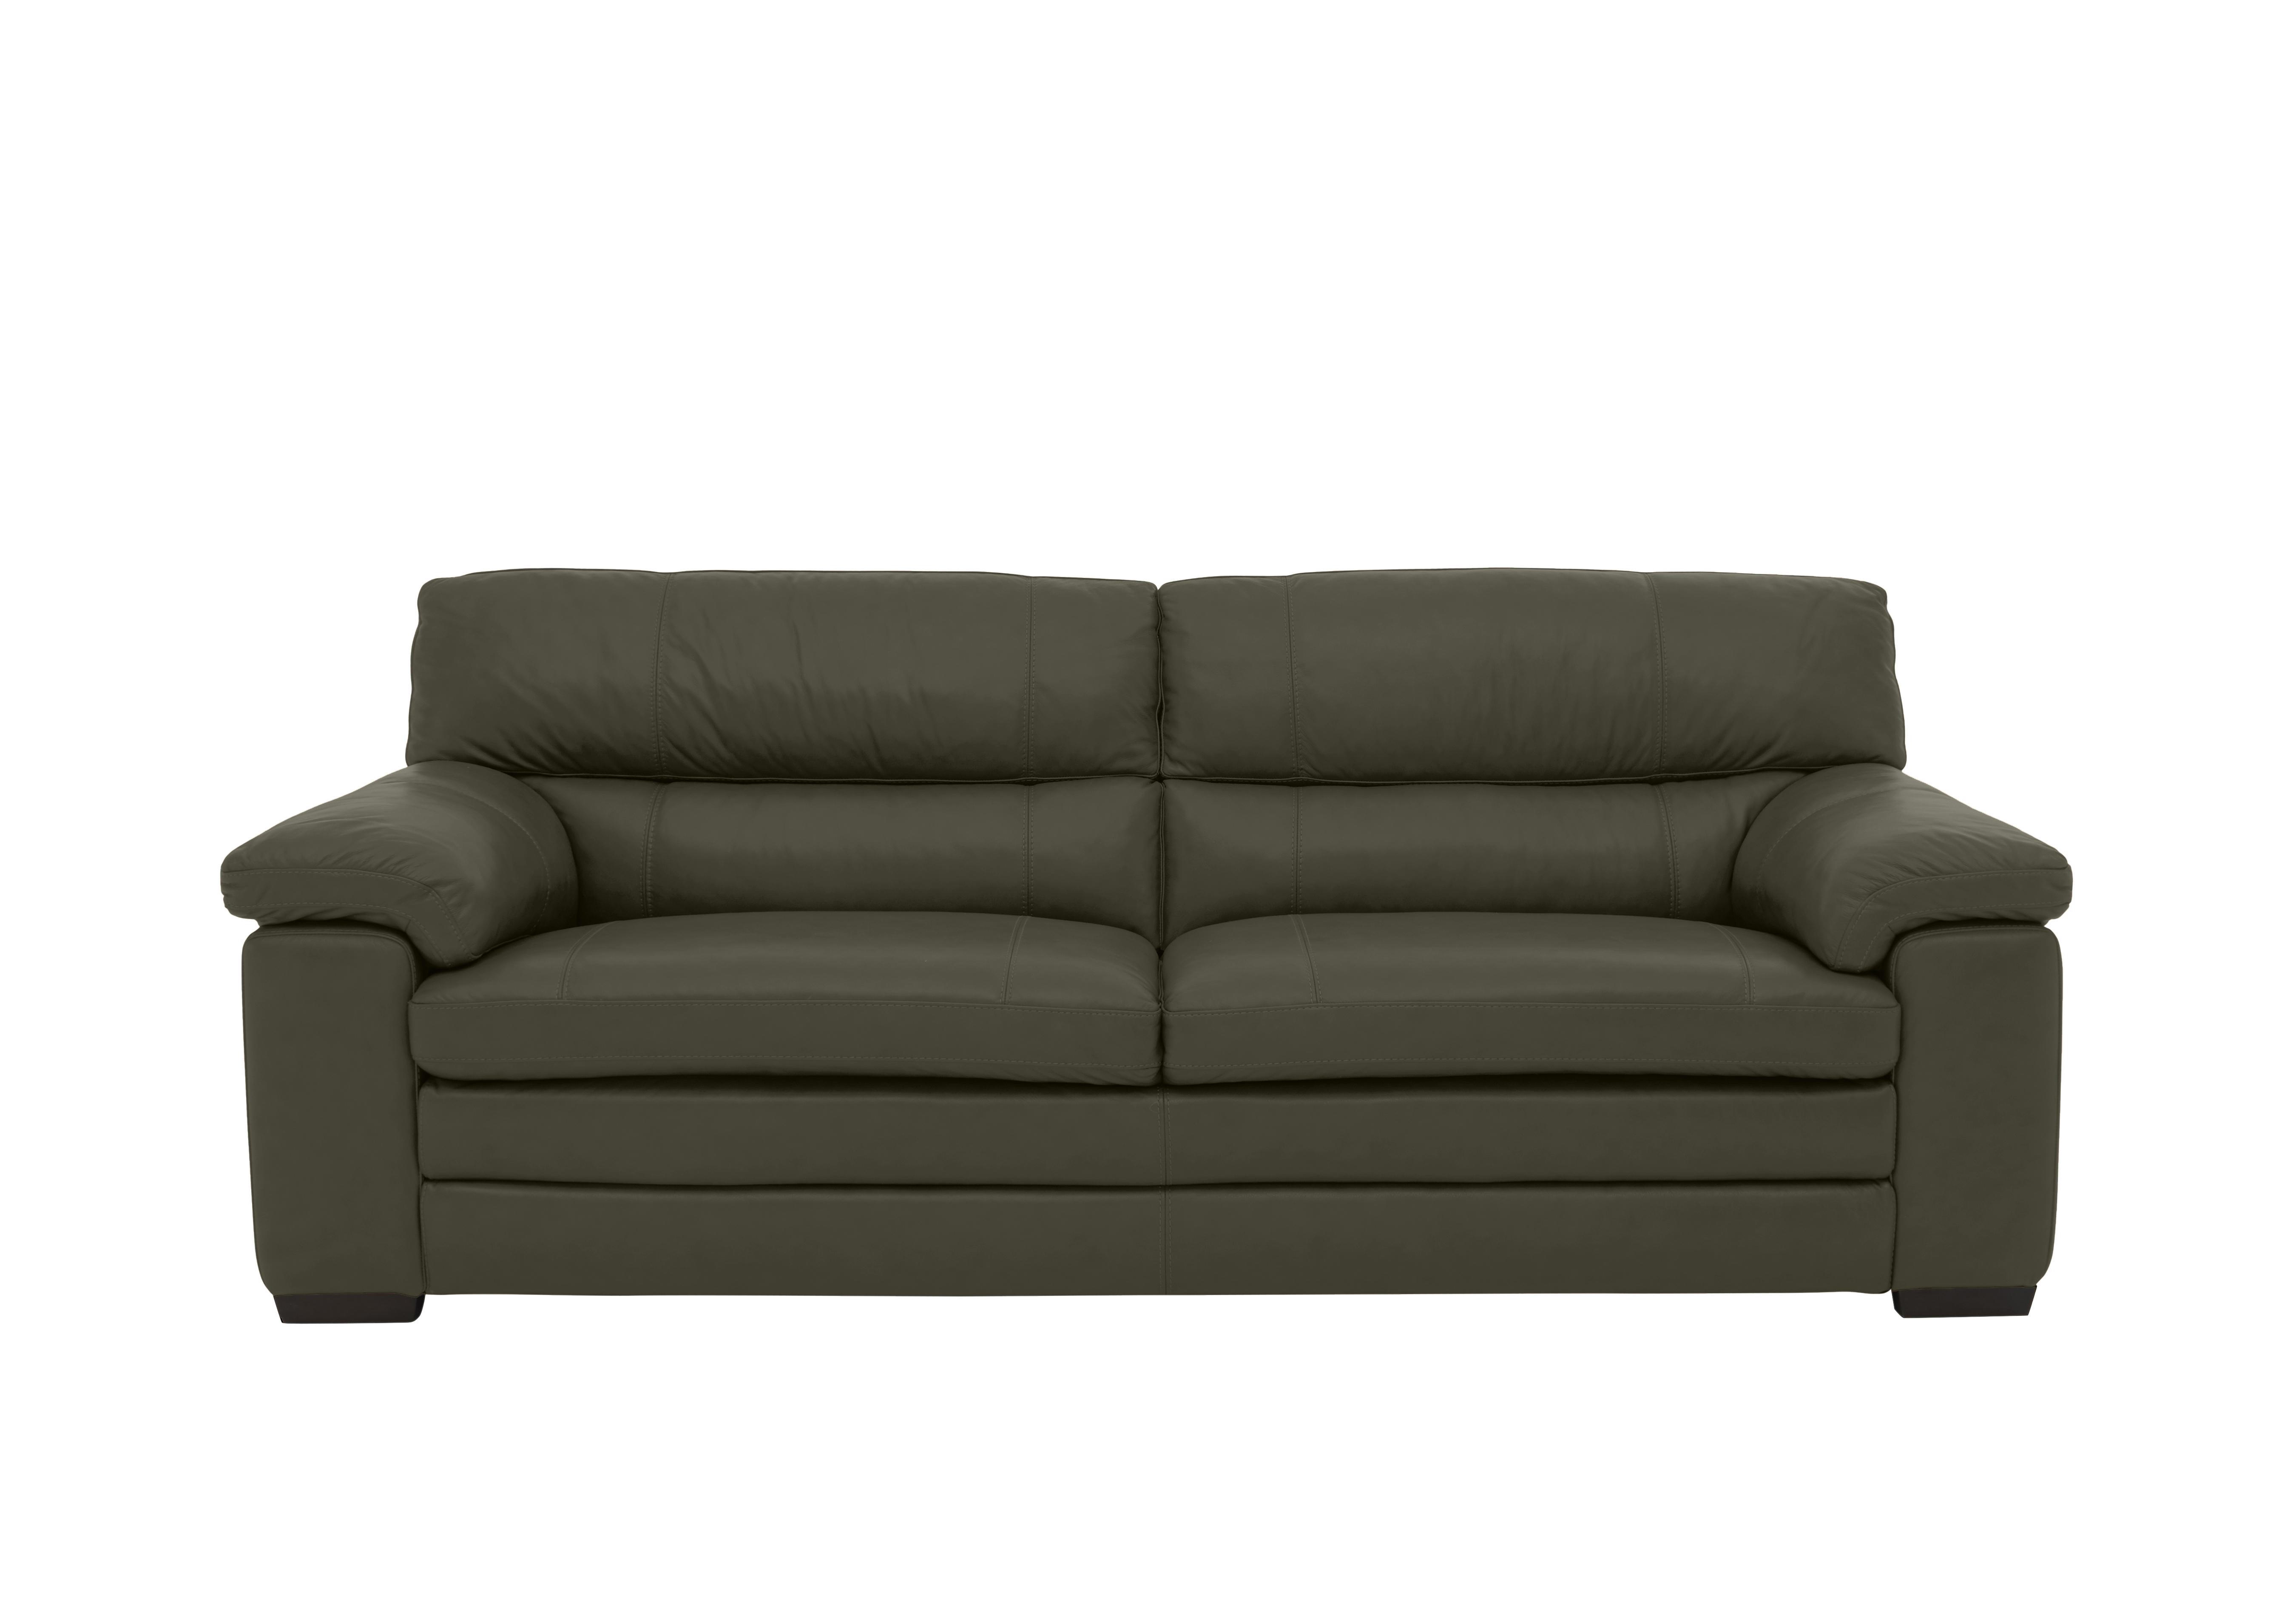 Cozee 3 Seater Pure Premium Leather Sofa in Nw-548e Olive on Furniture Village